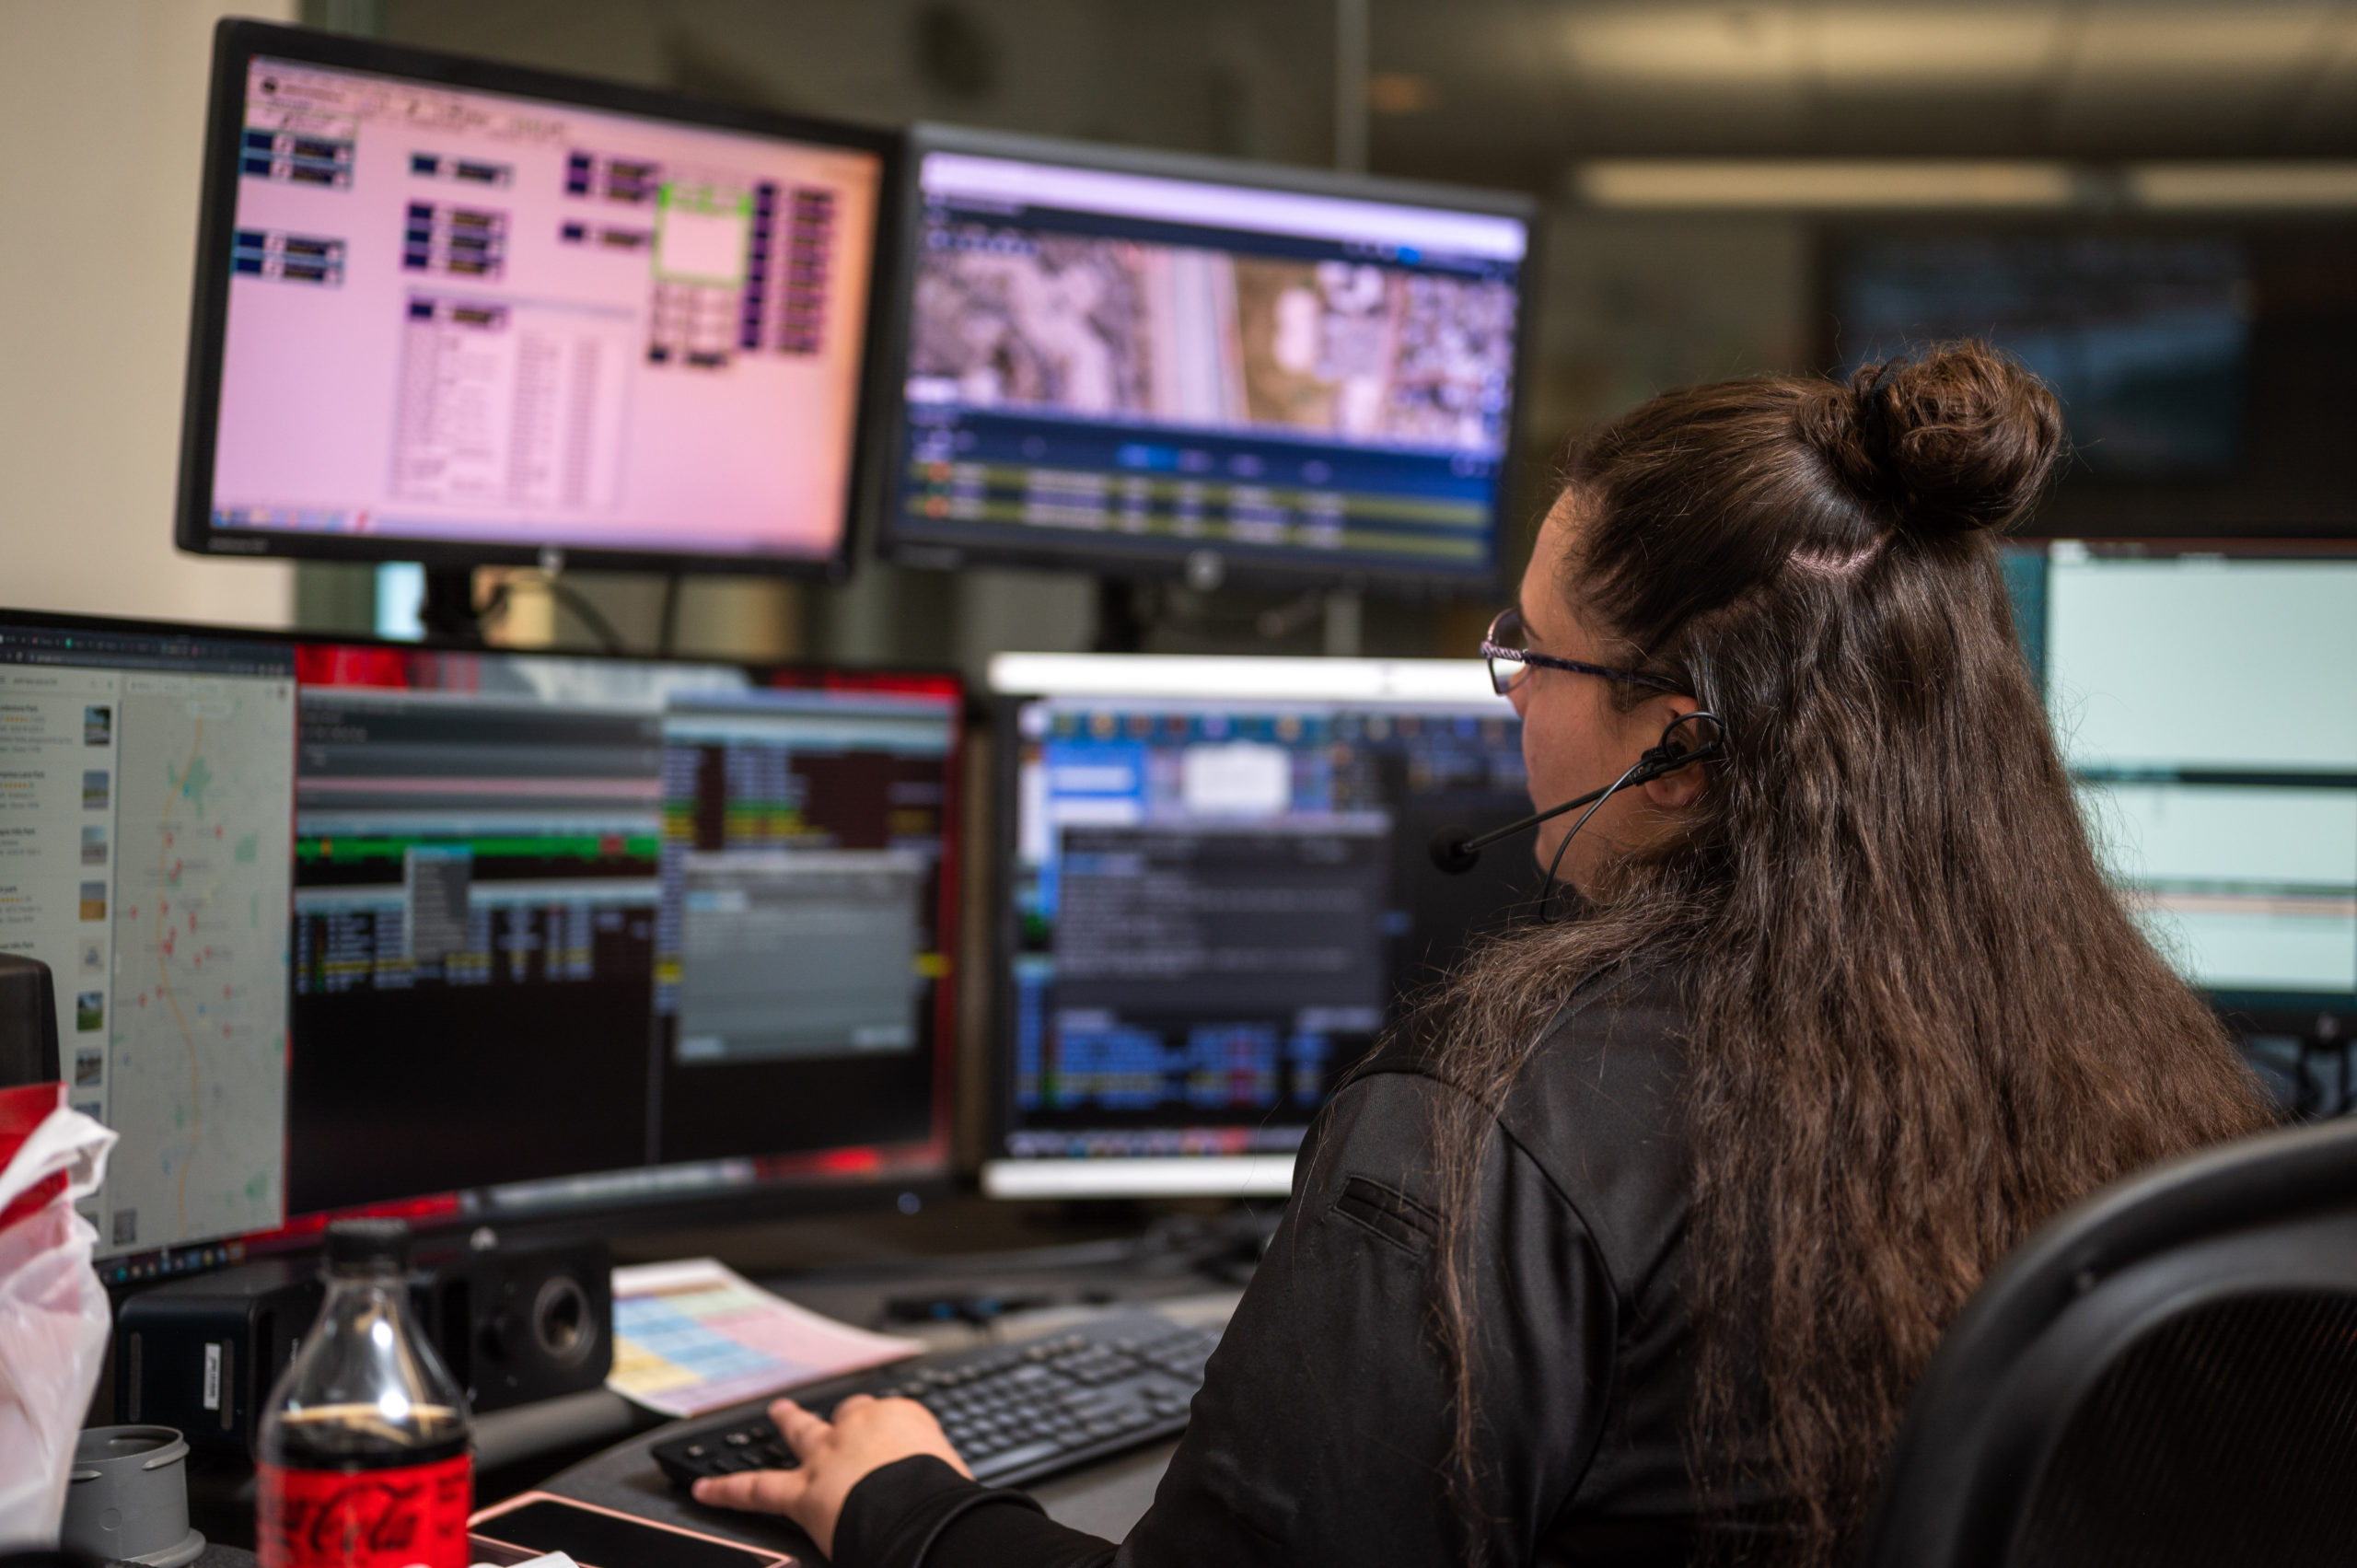 A dispatcher sits at a computer looking at multiple screens.